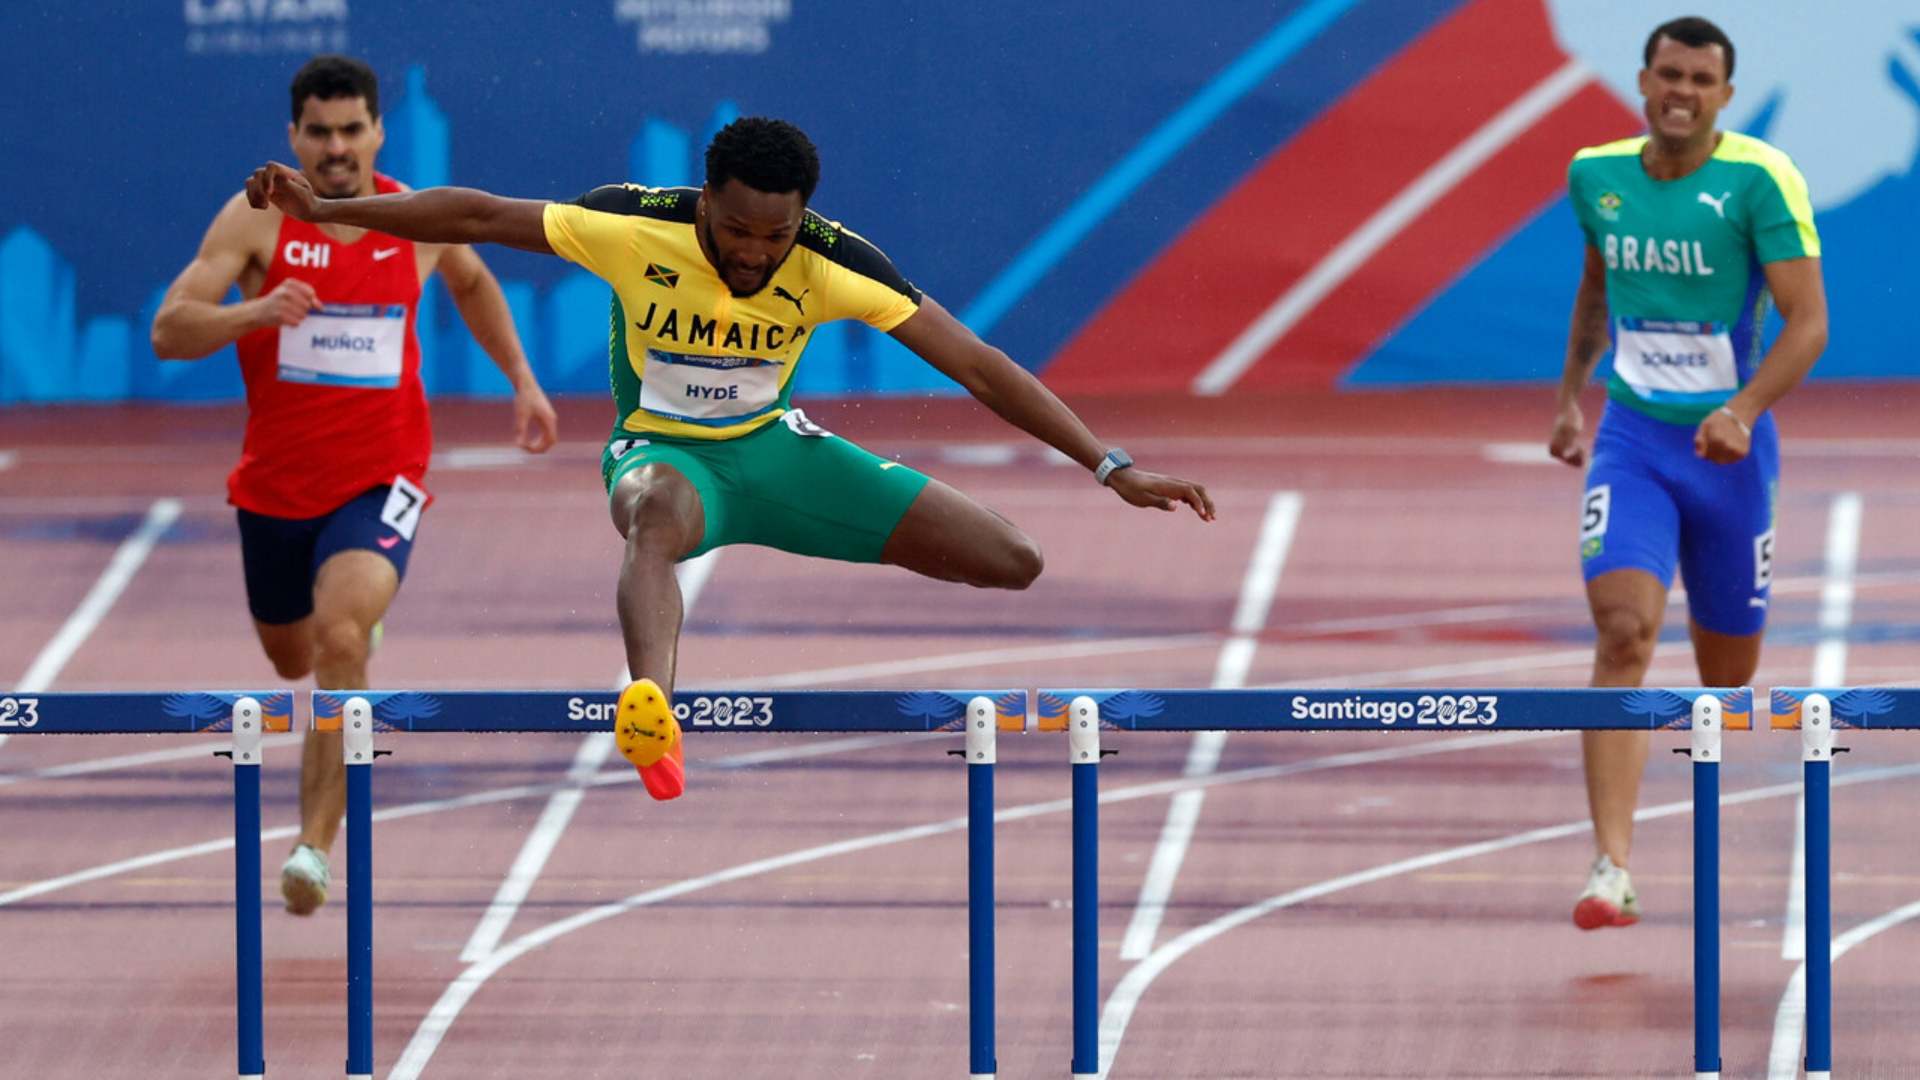 Jamaican Hyde and Brazilian Lima advance to the 400-meter hurdles final